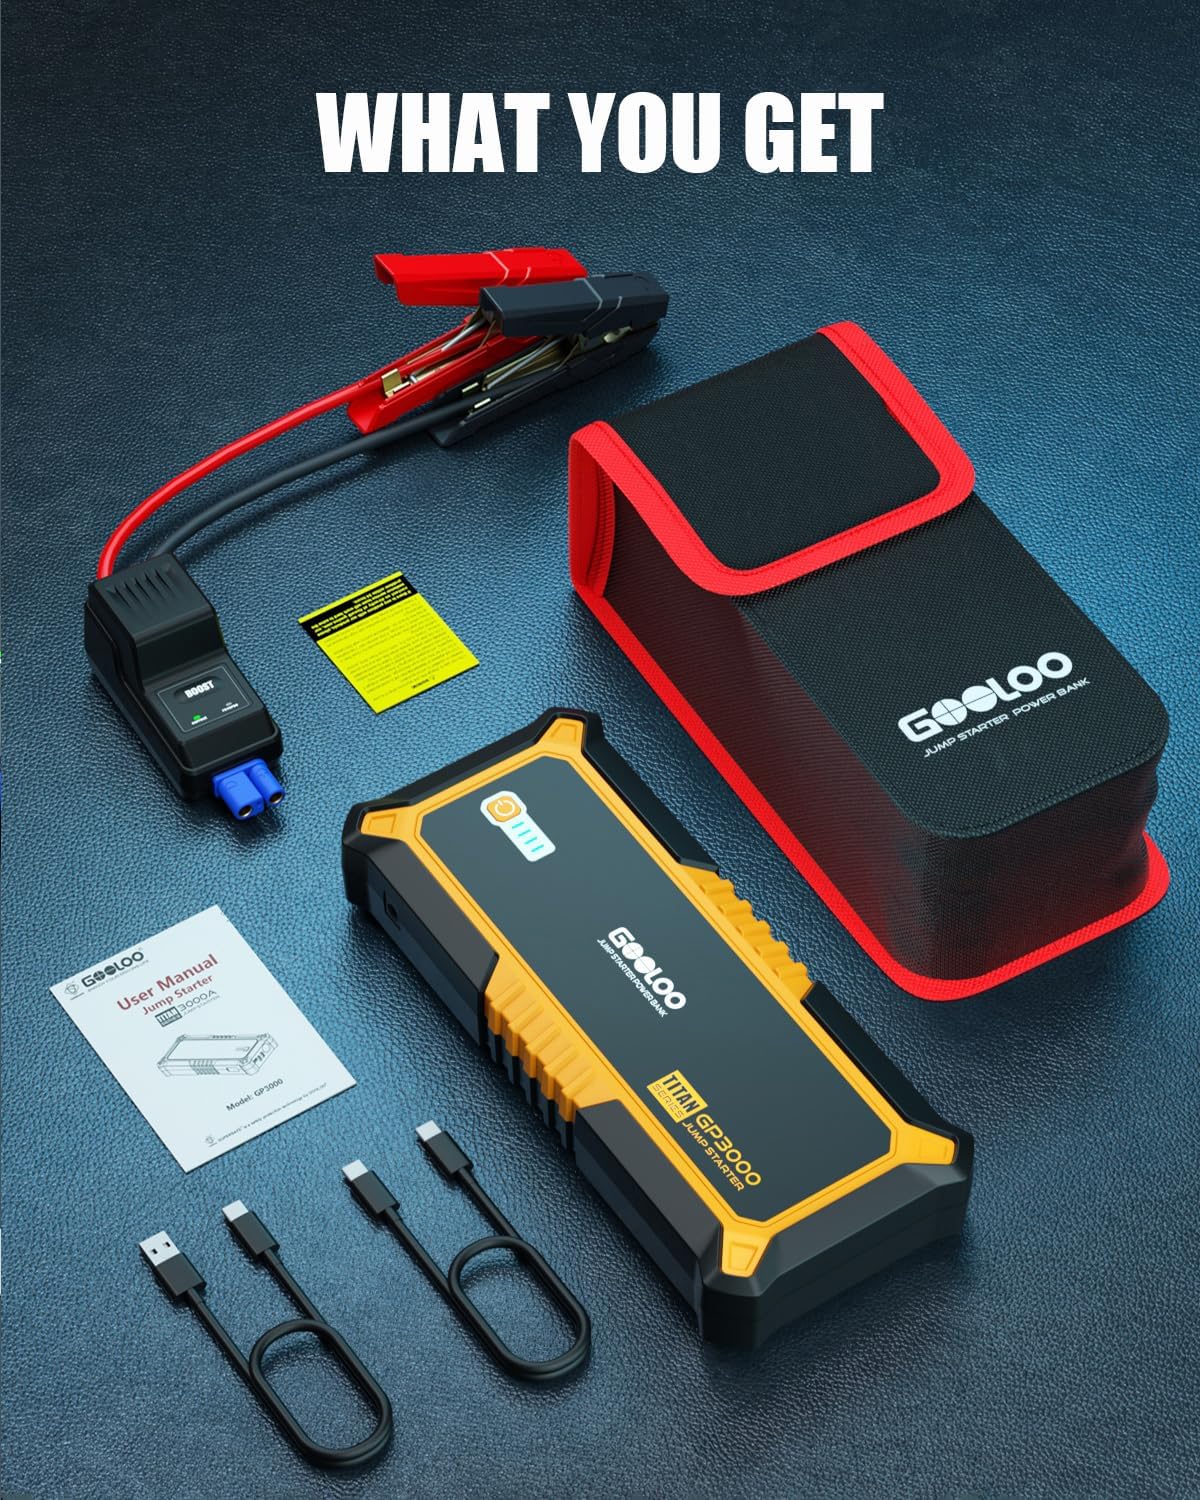 GOOLOO Upgraded GP3000 3000A Jump Starter,12V Car Battery Jump Starter (Up  to 9L Gas Engines & 7L Diesel) Supersafe Lithium Jump Box Battery Booster